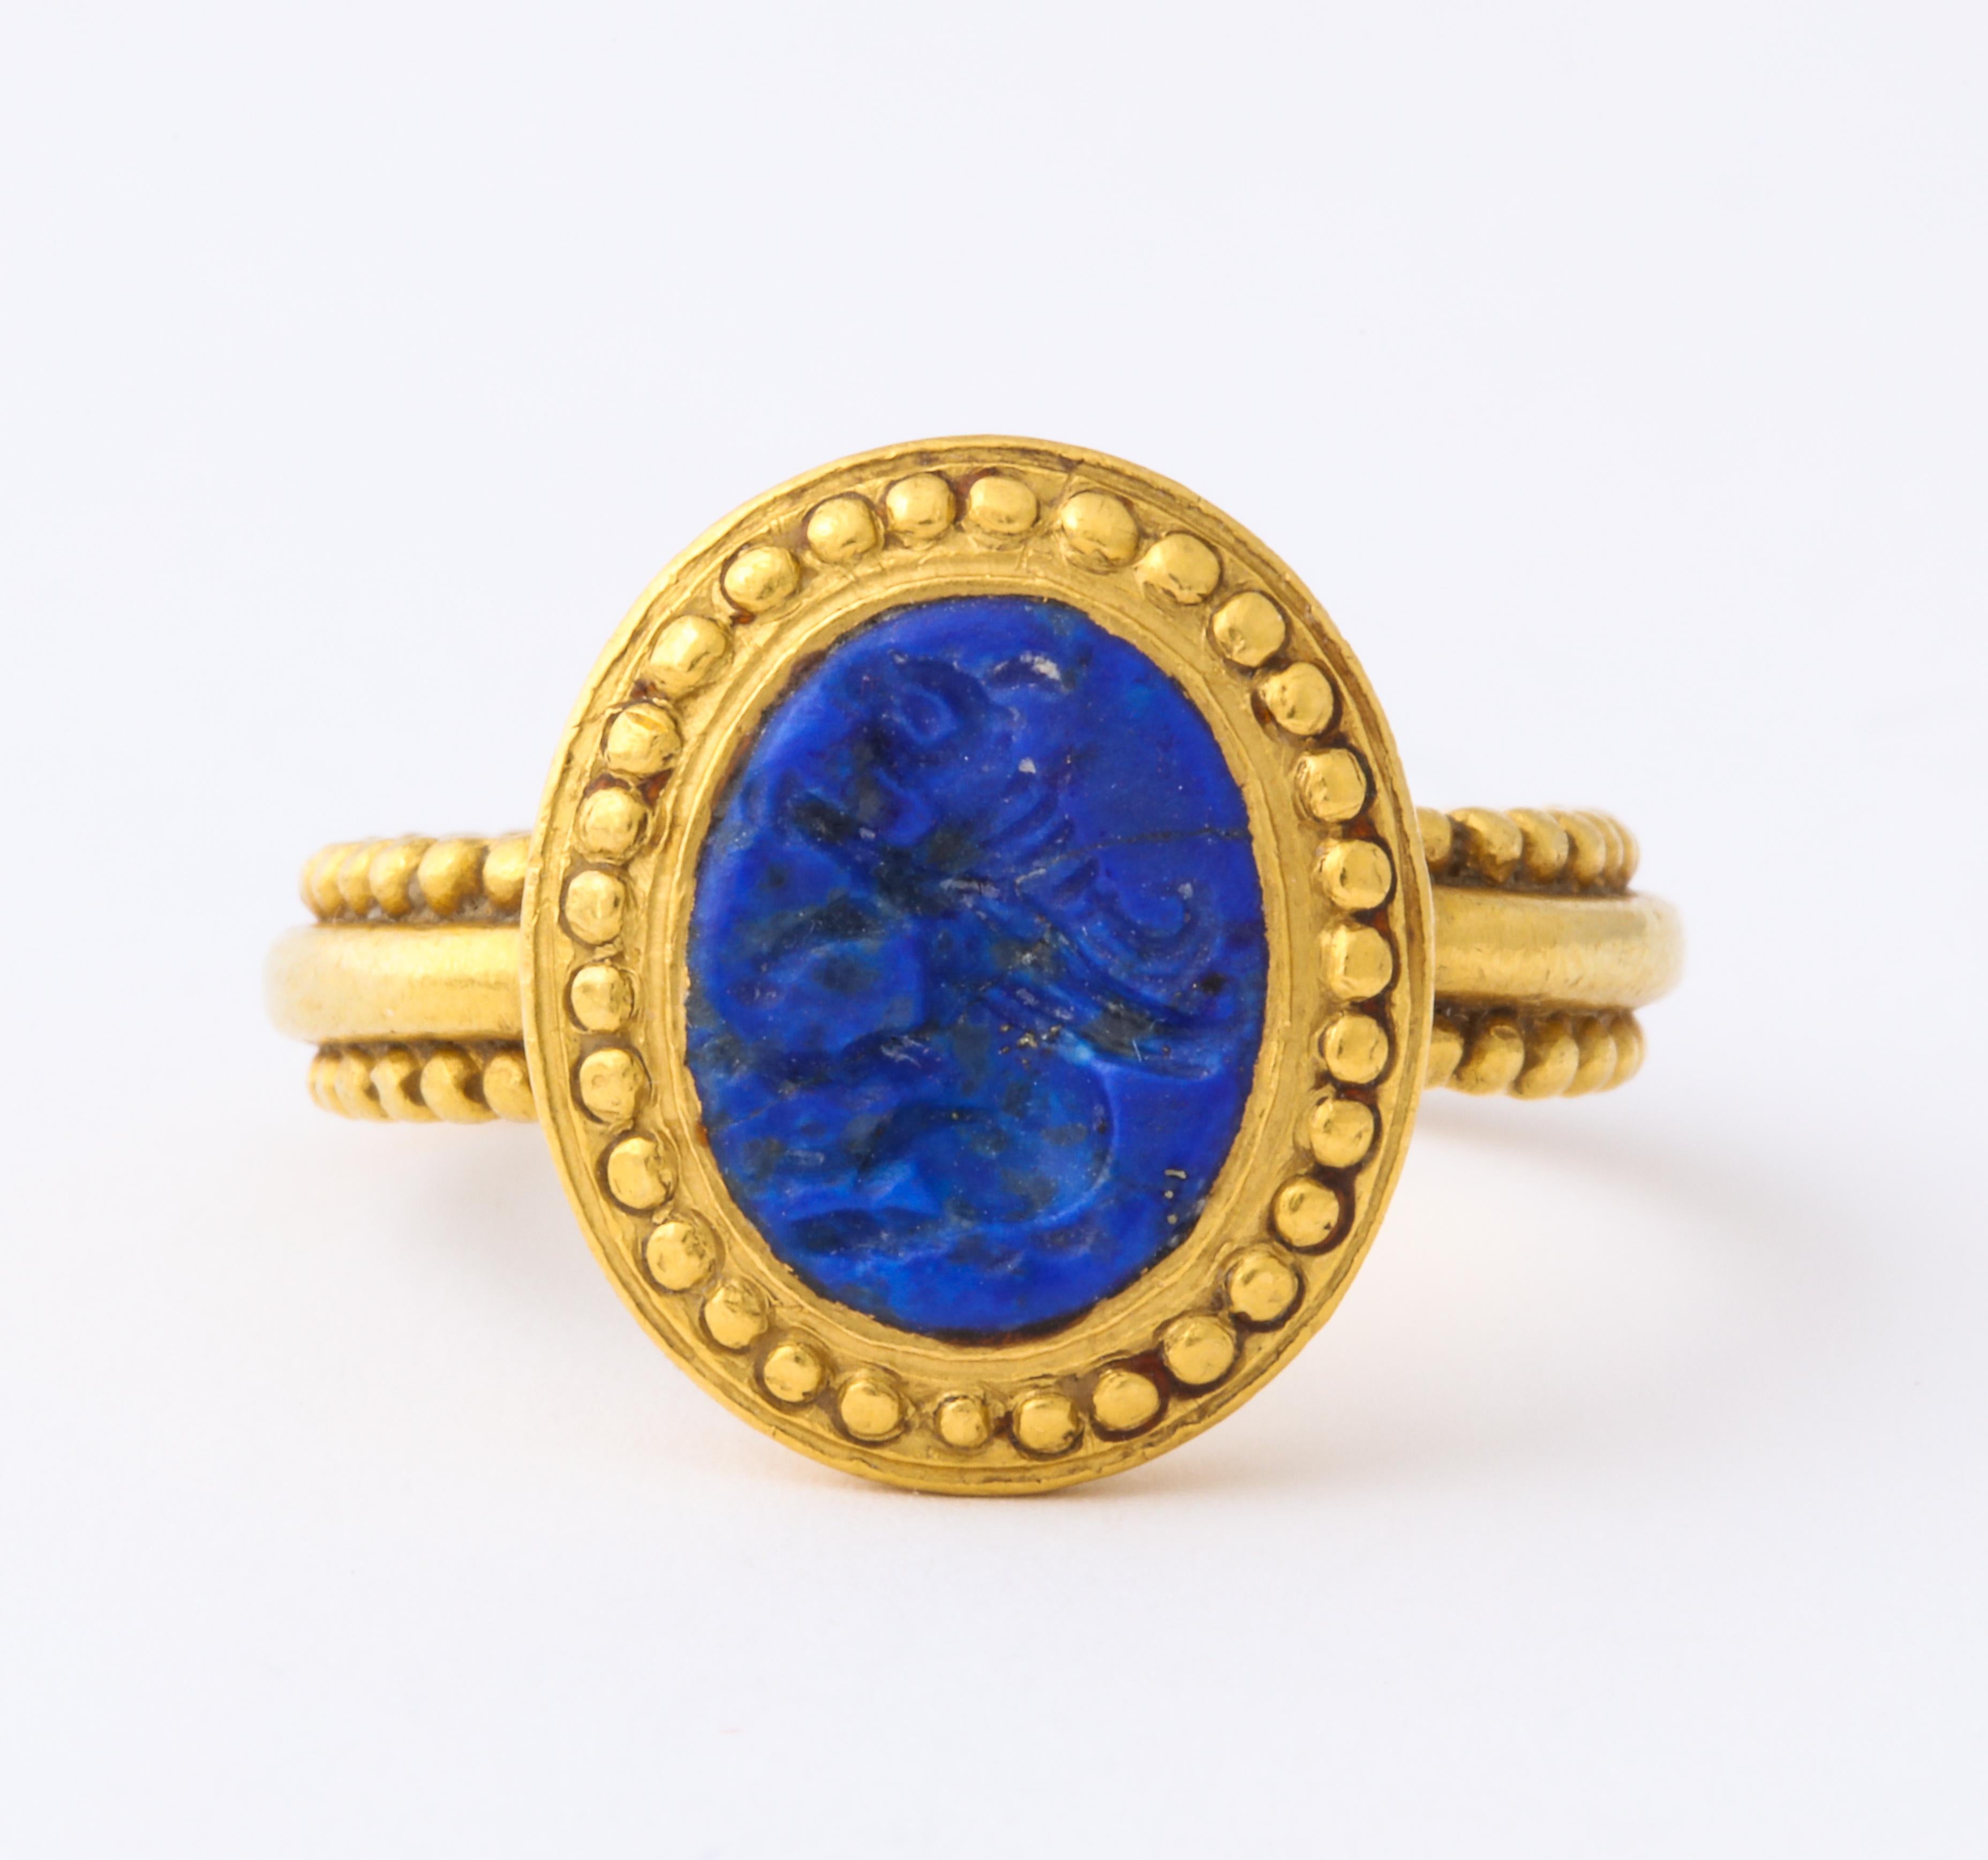 The beaded shank and face  of this magnificent Roman Sassanian ring c. 600 AD, is set in high carat gold with a rare lapis intaglio of an animal significant in its day of creation. The influence of design is a confluence of Iranian and Roman. The